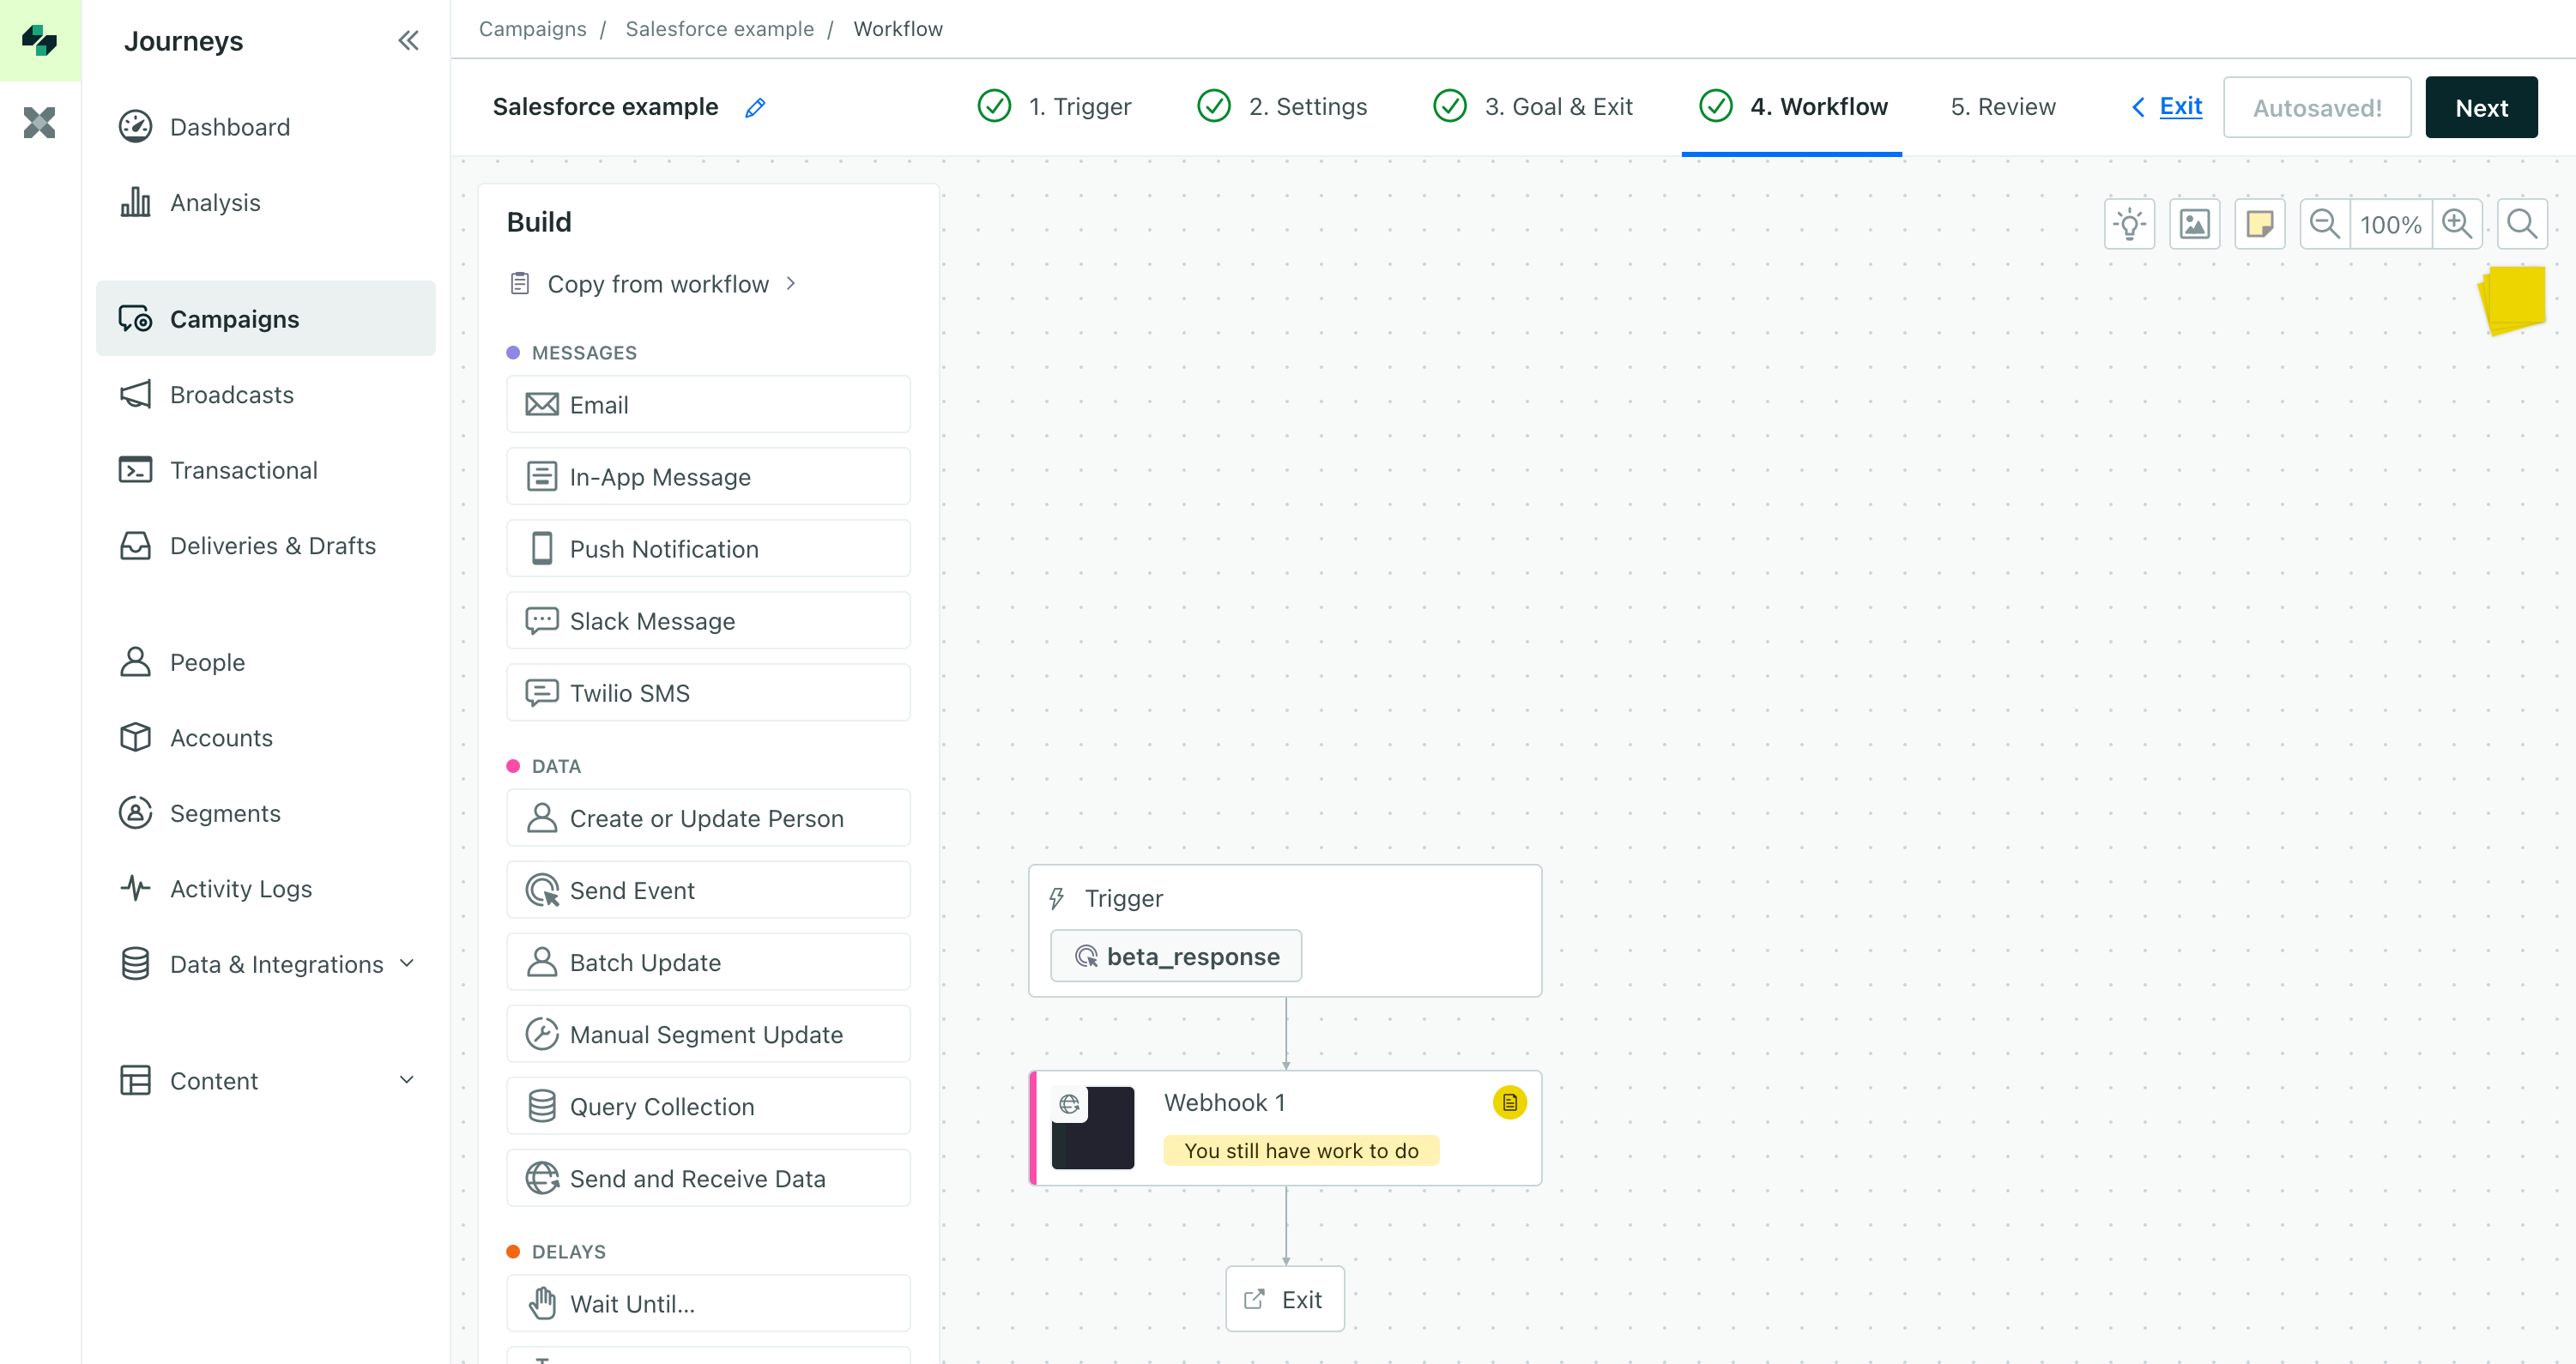 A send or receive data action added to a workflow. In the workflow, it's called a webhook.